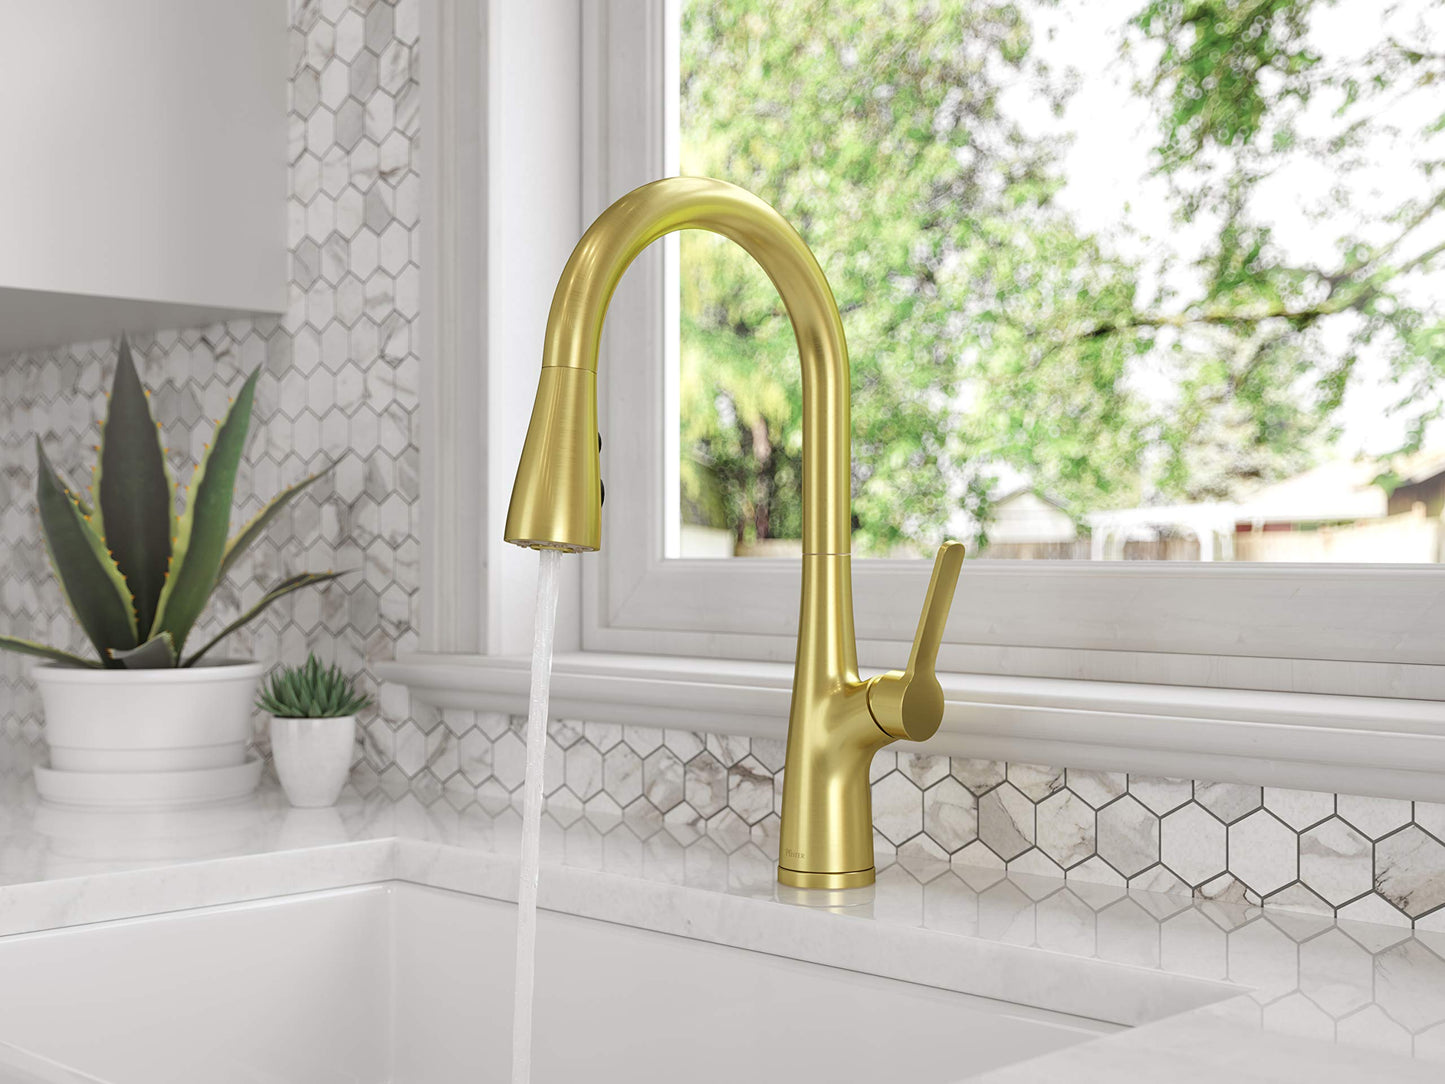 Pfister Neera Single-Handle Pull-Down Sprayer Kitchen Faucet in Brushed Gold